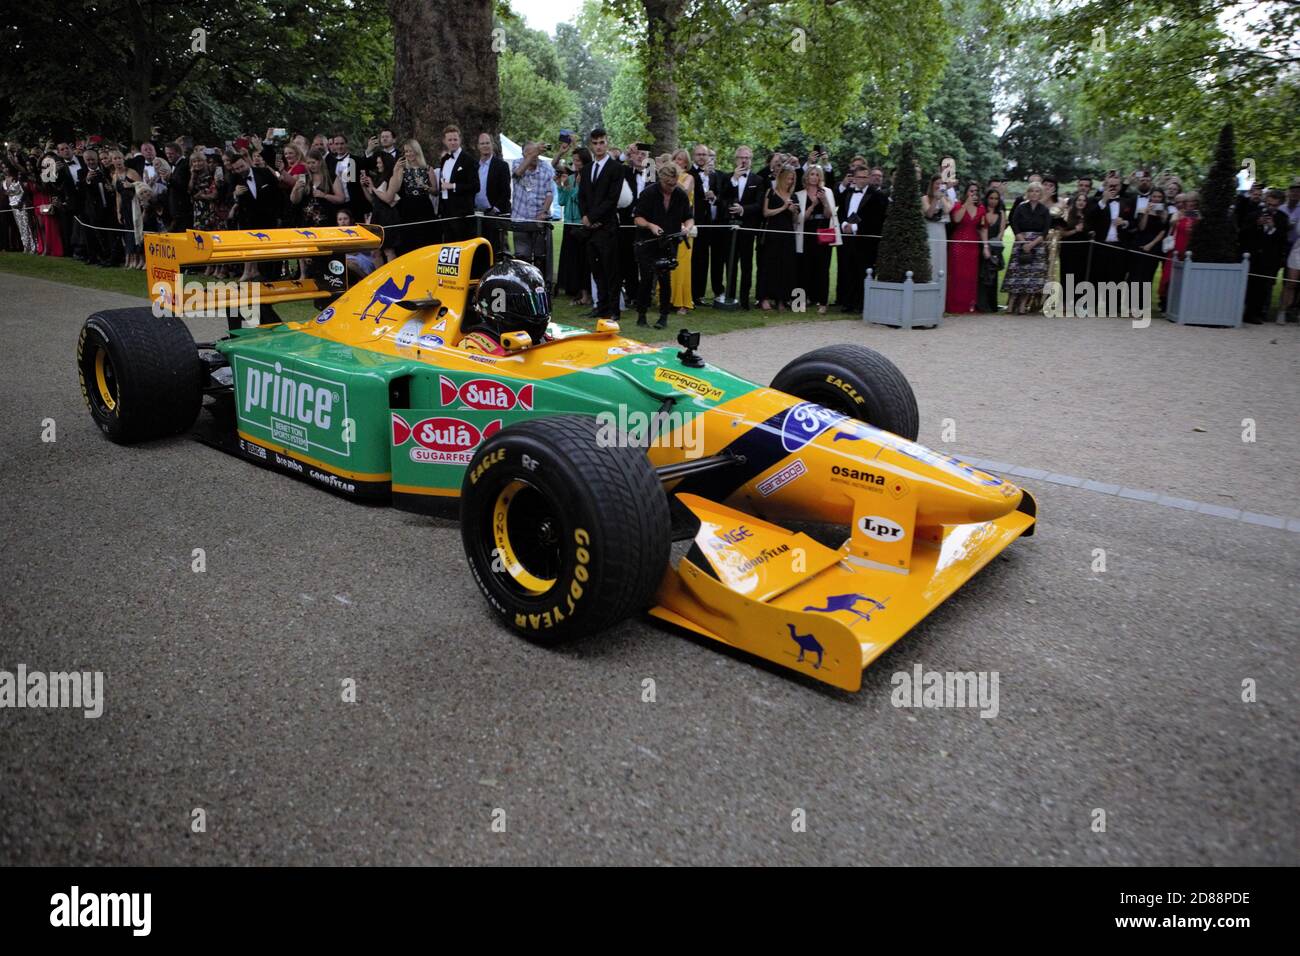 The 1992 Michael Schumacher Benetton B192 seen during the Live show performance at the 2019 Grand Prix Ball. Stock Photo